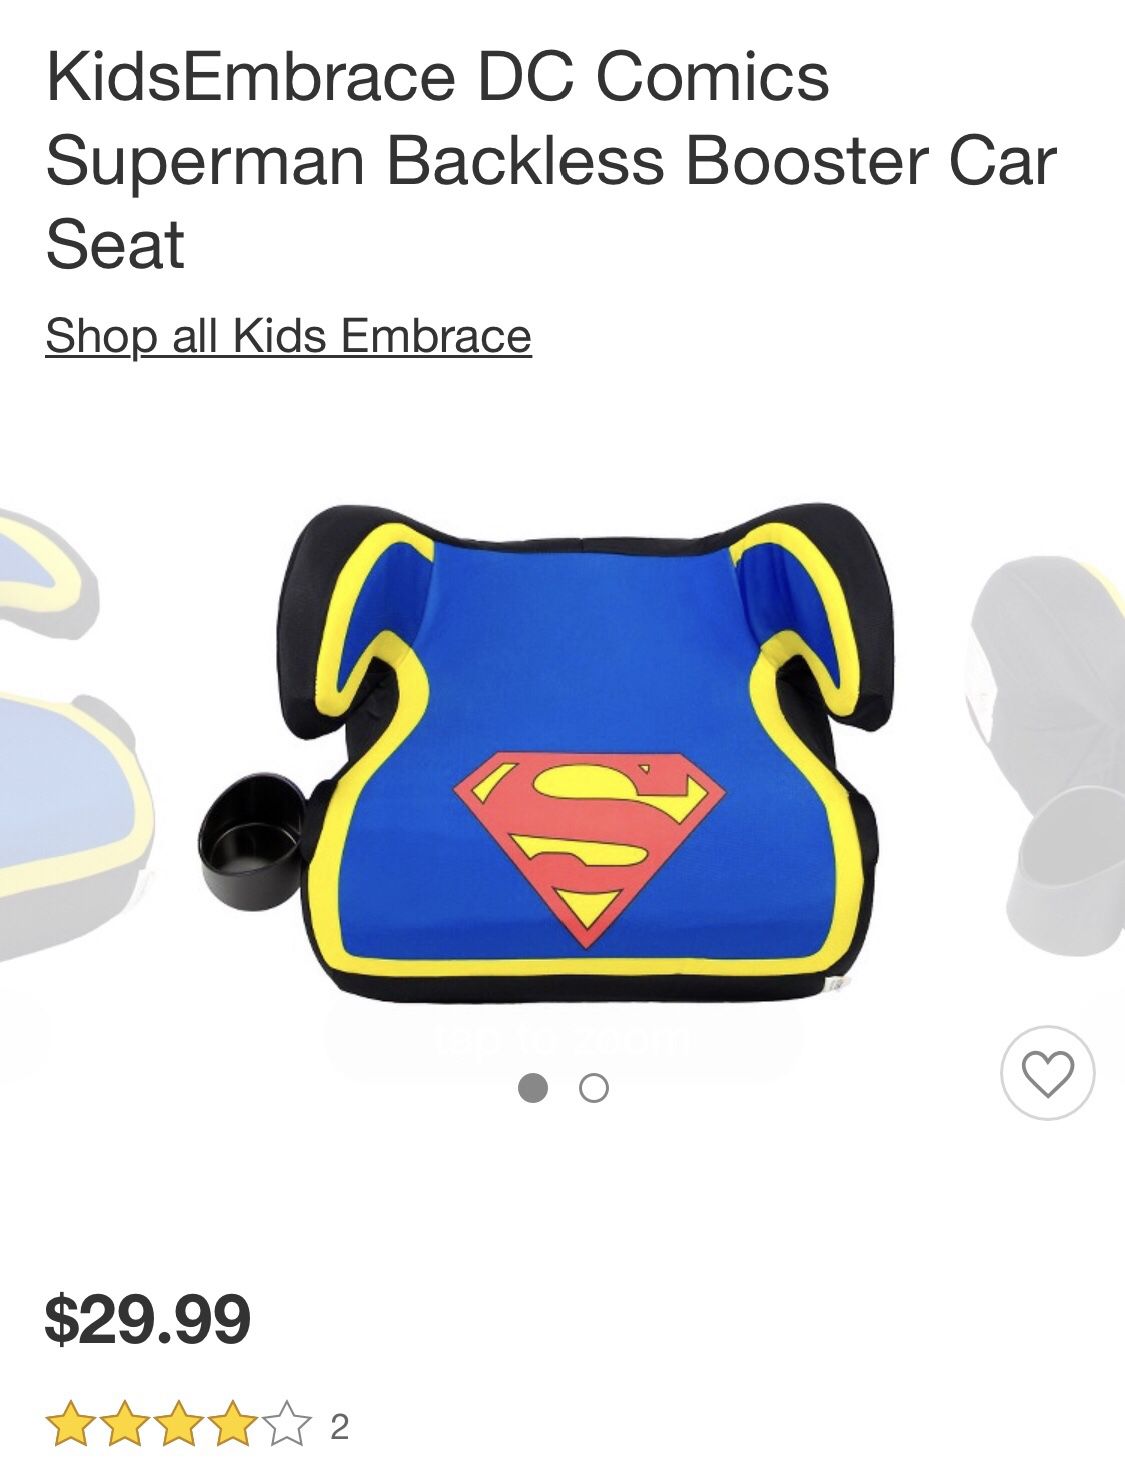 New, in box. Superman booster seat.